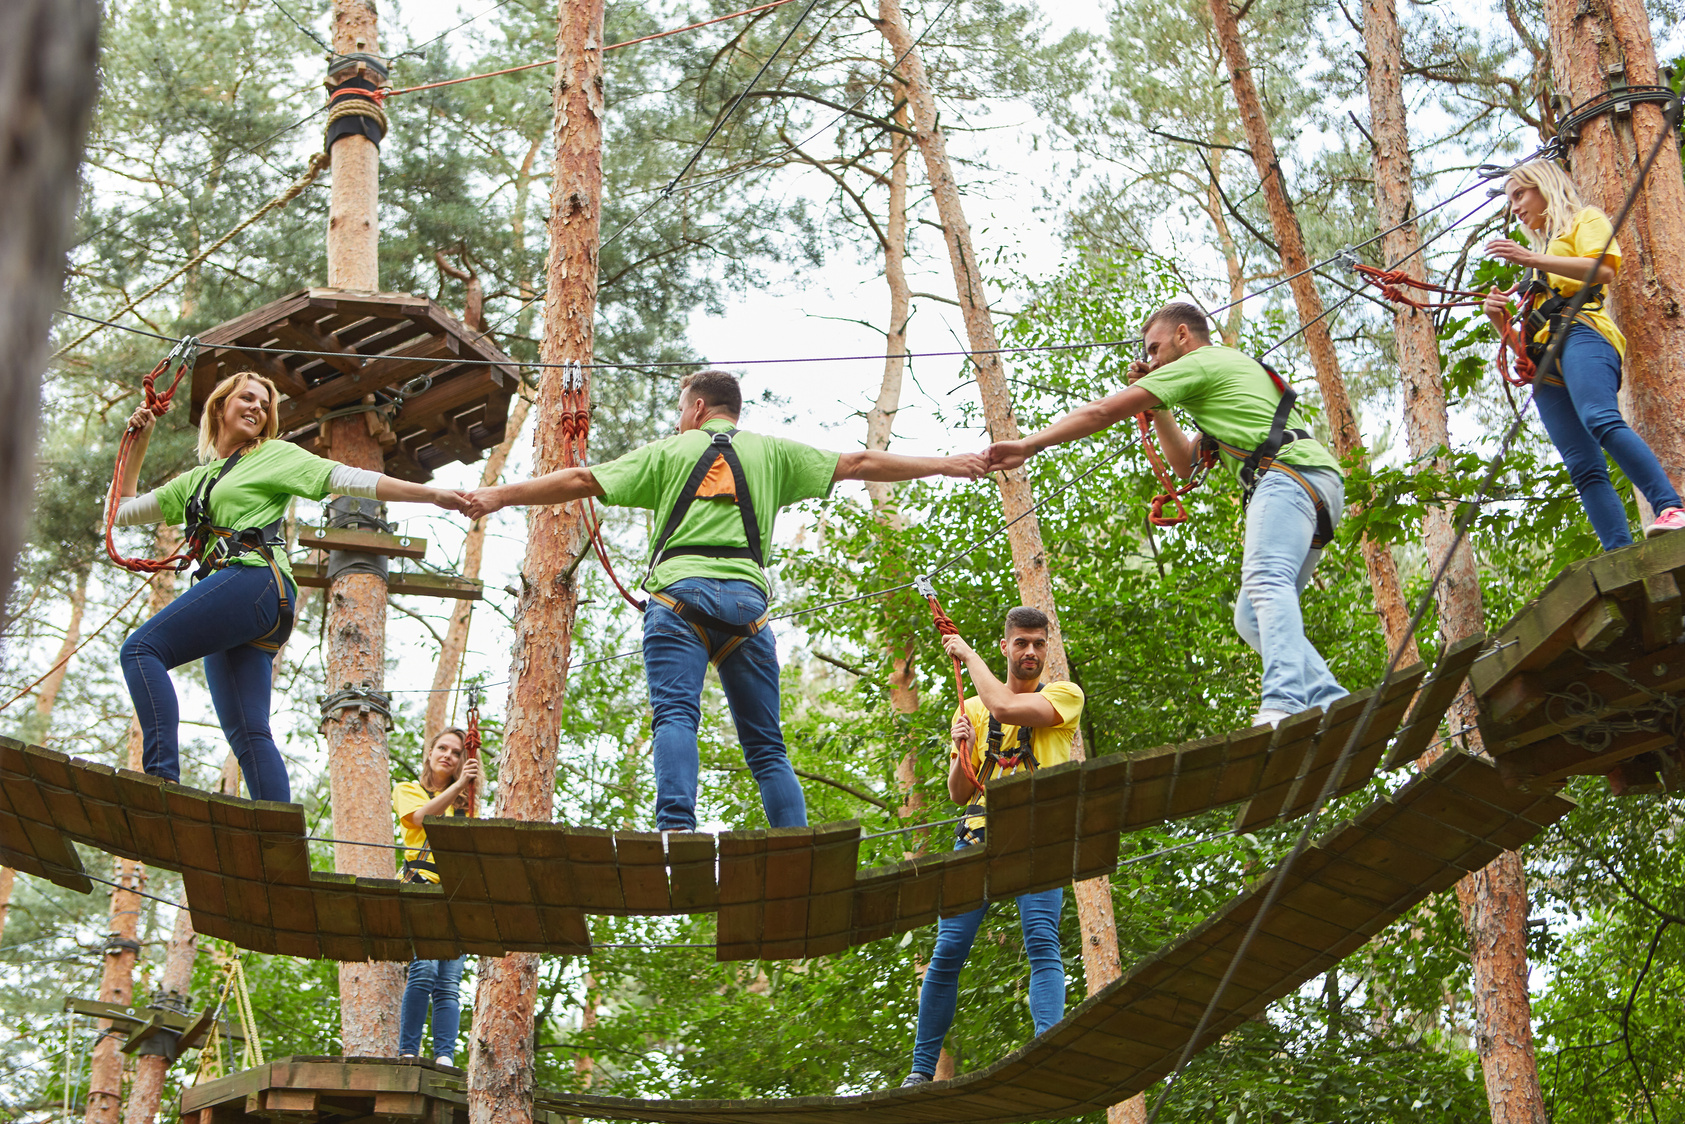 Group Climbing in the High Ropes Course as a Team Building Activ